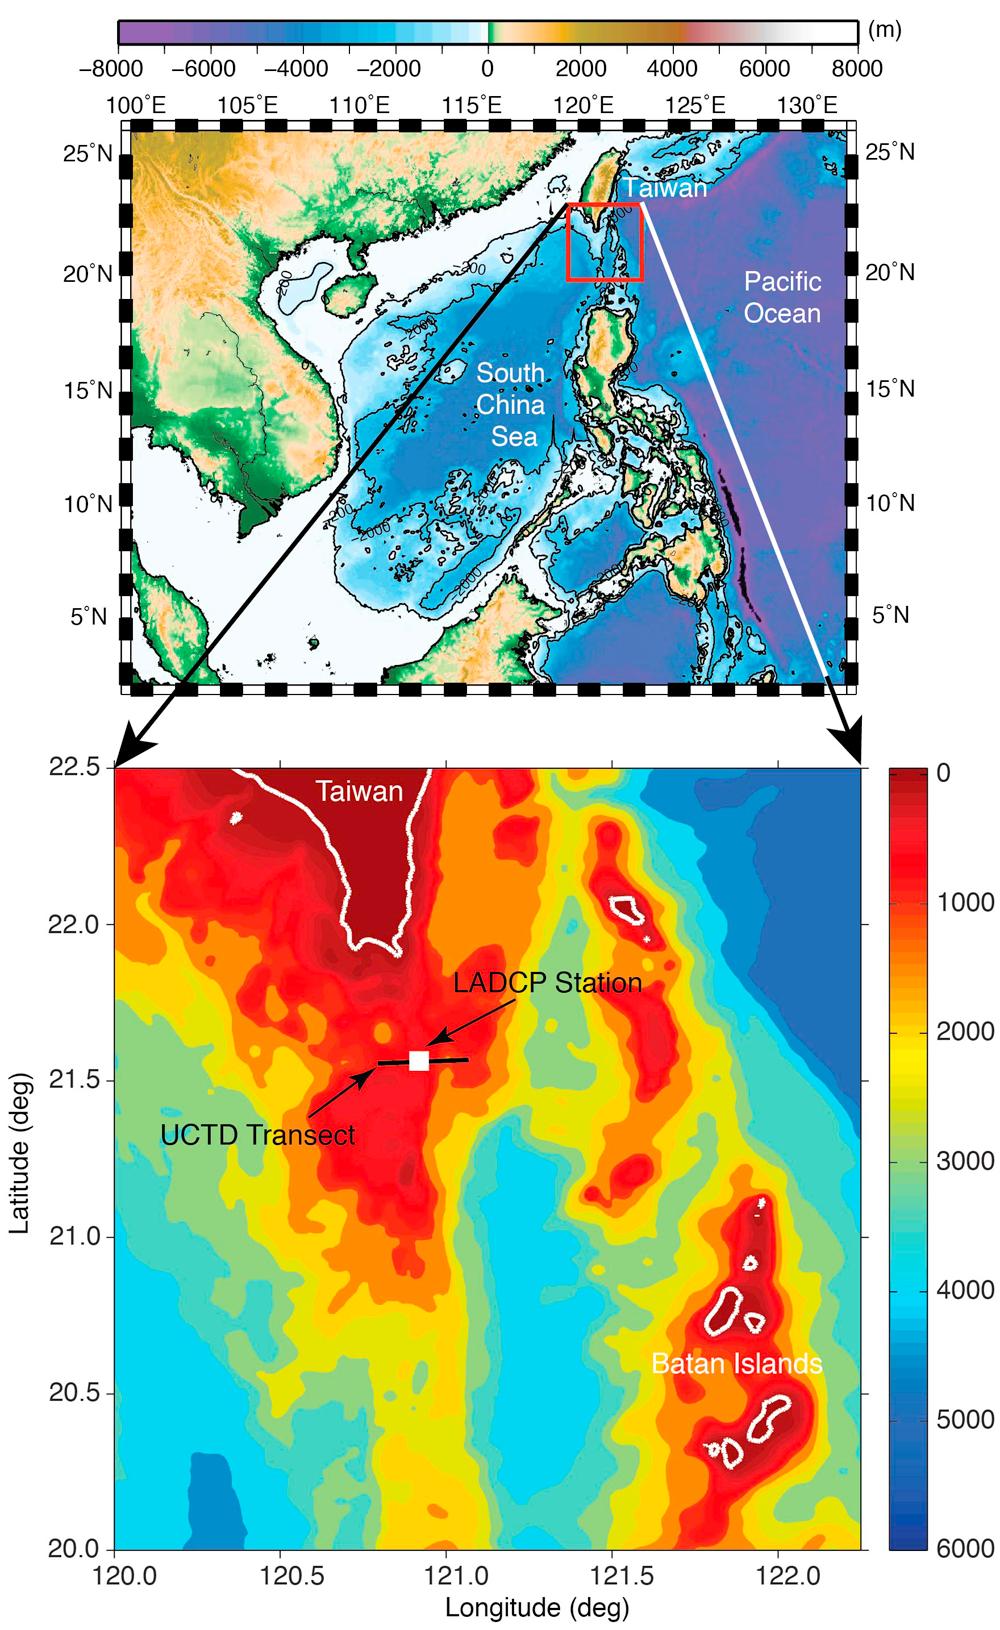 eastern ridge centered near 19 48 N, 121 48 E just north of Babuyan Island in the Balintang Channel, and one on the northern Heng-Chun Ridge where the water is less than 500 m deep.